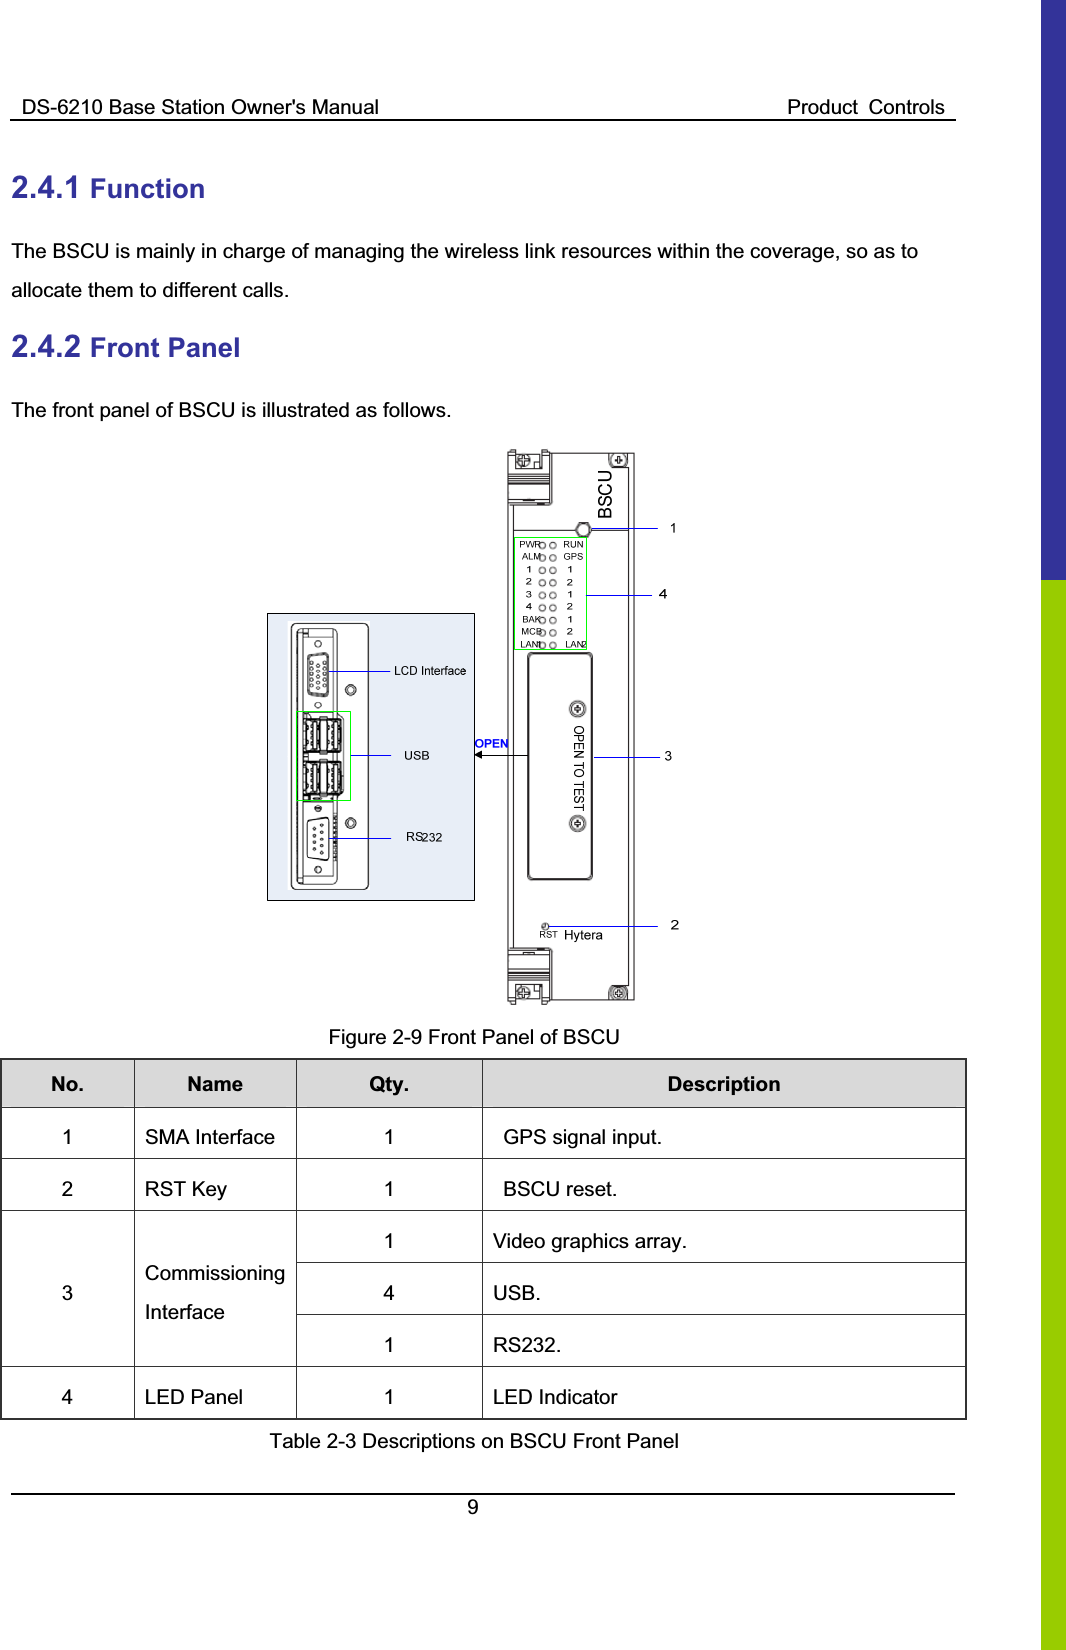 DS-6210 Base Station Owner&apos;s Manual  Product  Controls92.4.1 FunctionThe BSCU is mainly in charge of managing the wireless link resources within the coverage, so as to allocate them to different calls.   2.4.2 Front Panel   The front panel of BSCU is illustrated as follows.   Figure 2-9 Front Panel of BSCU No. Name    Qty.  Description 1  SMA Interface    1    GPS signal input.   2  RST Key  1    BSCU reset.   1  Video graphics array.   4  USB.   3CommissioningInterface1  RS232.   4  LED Panel    1  LED Indicator   Table 2-3 Descriptions on BSCU Front Panel 